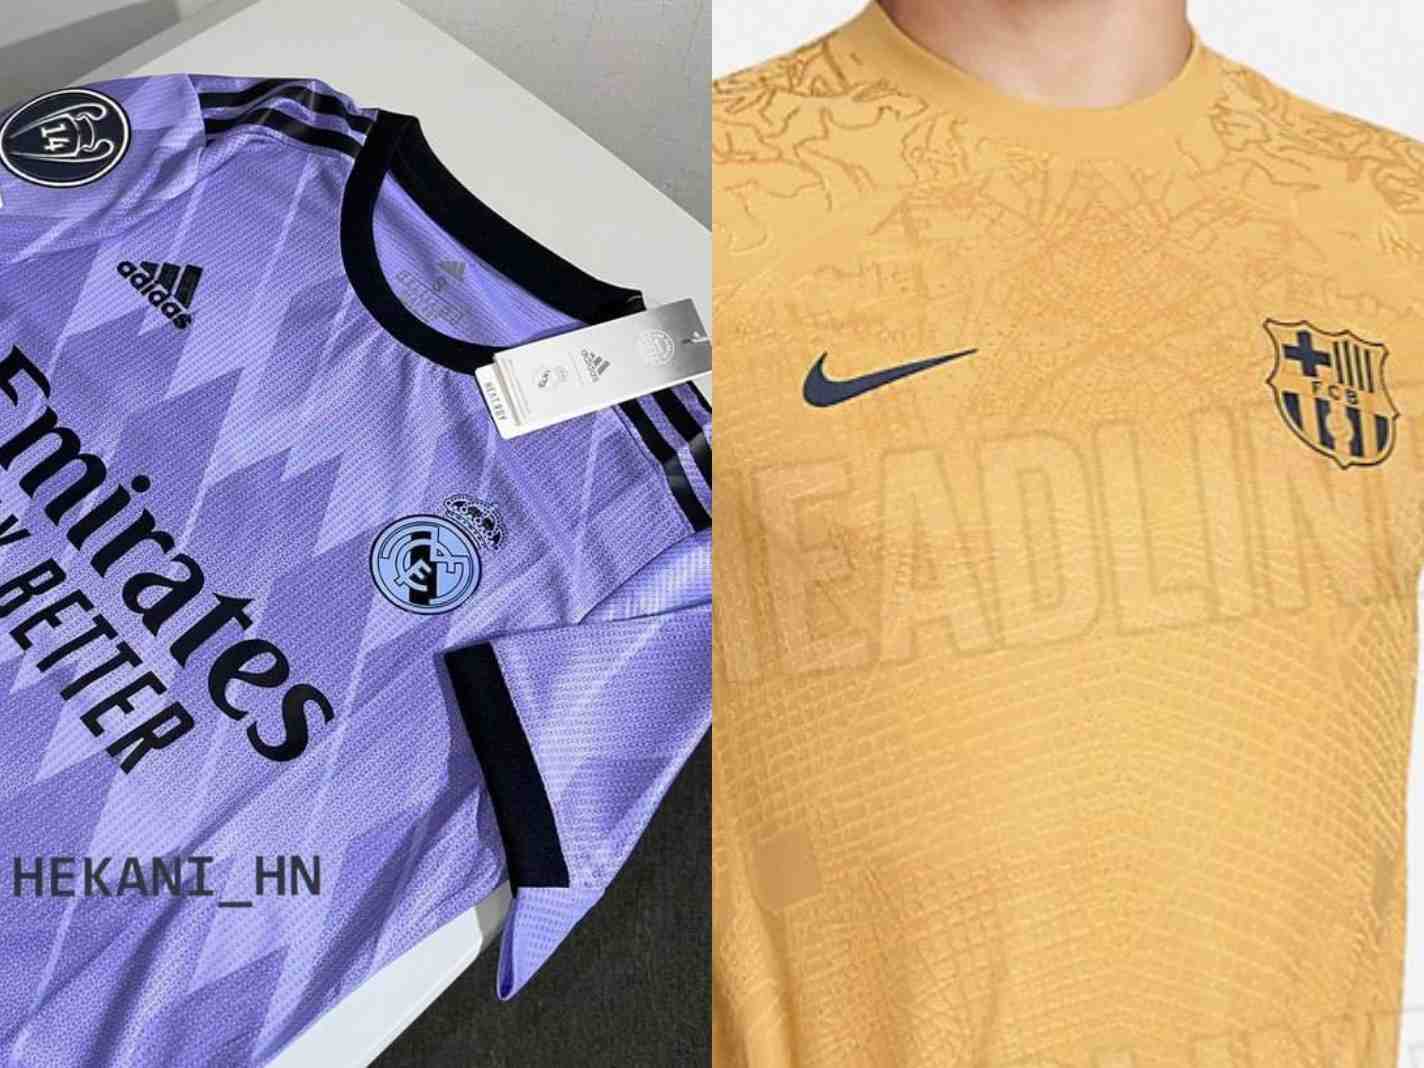 Real Madrid to Wear Striking Purple as Barcelona Goes Gold for 22/23 Away Kits